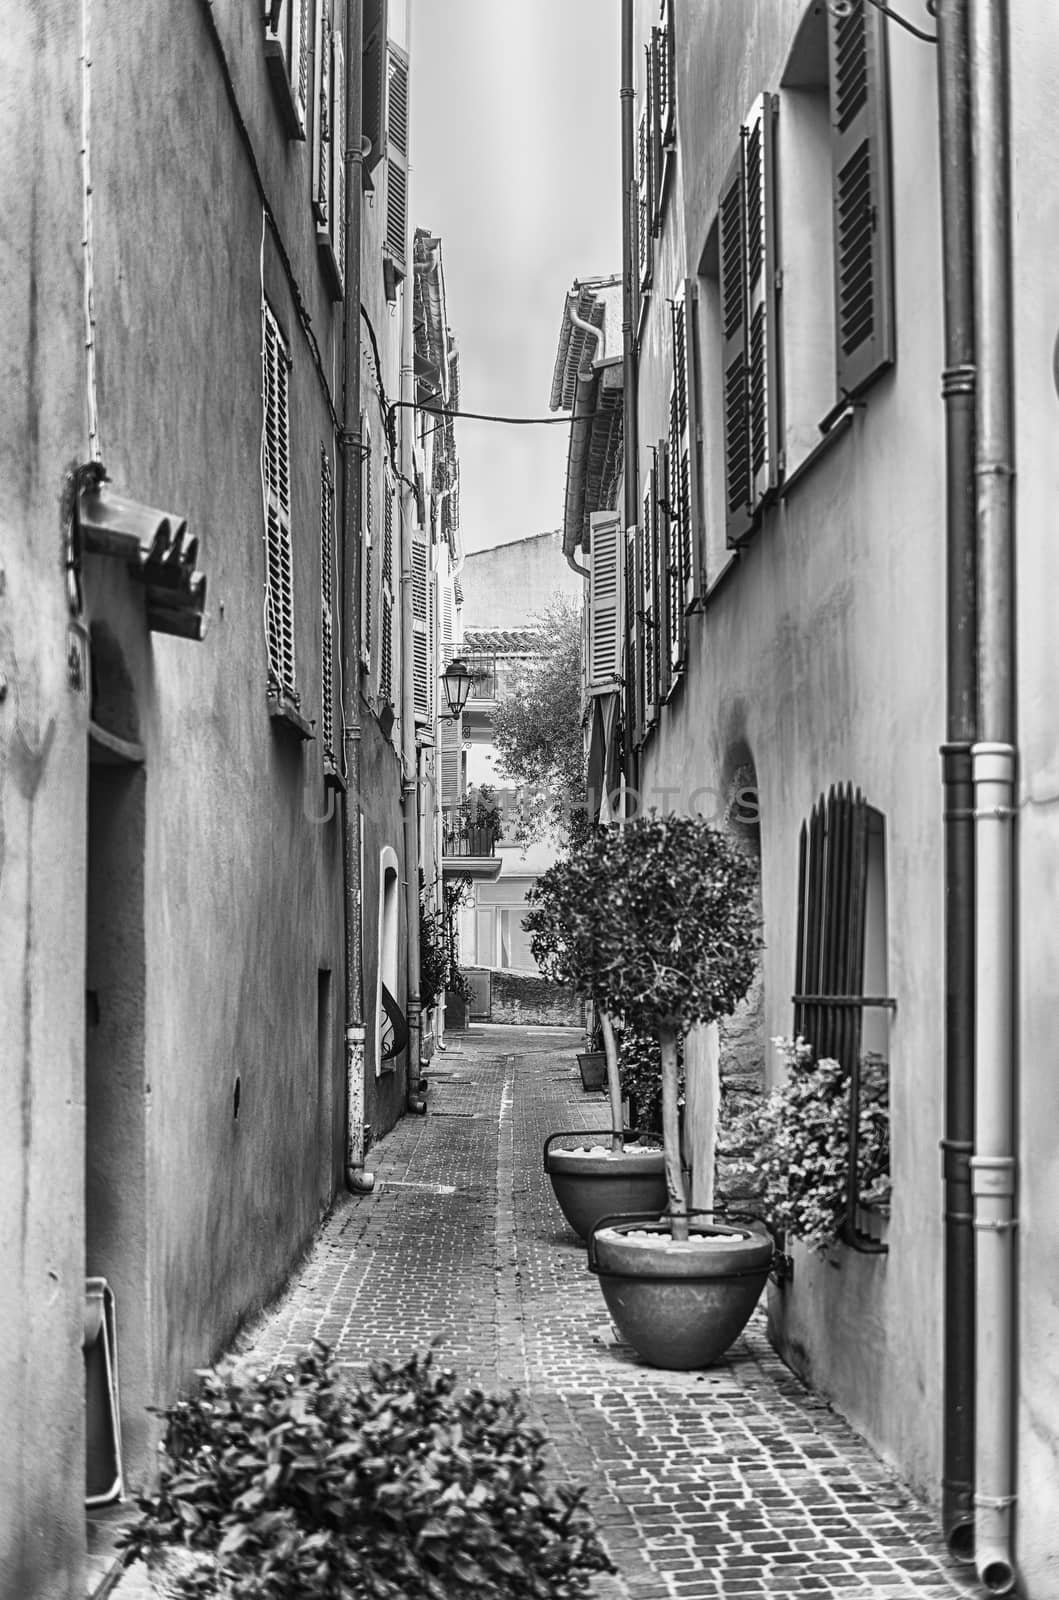 Walking in the picturesque streets of Saint-Tropez, Cote d'Azur, by marcorubino